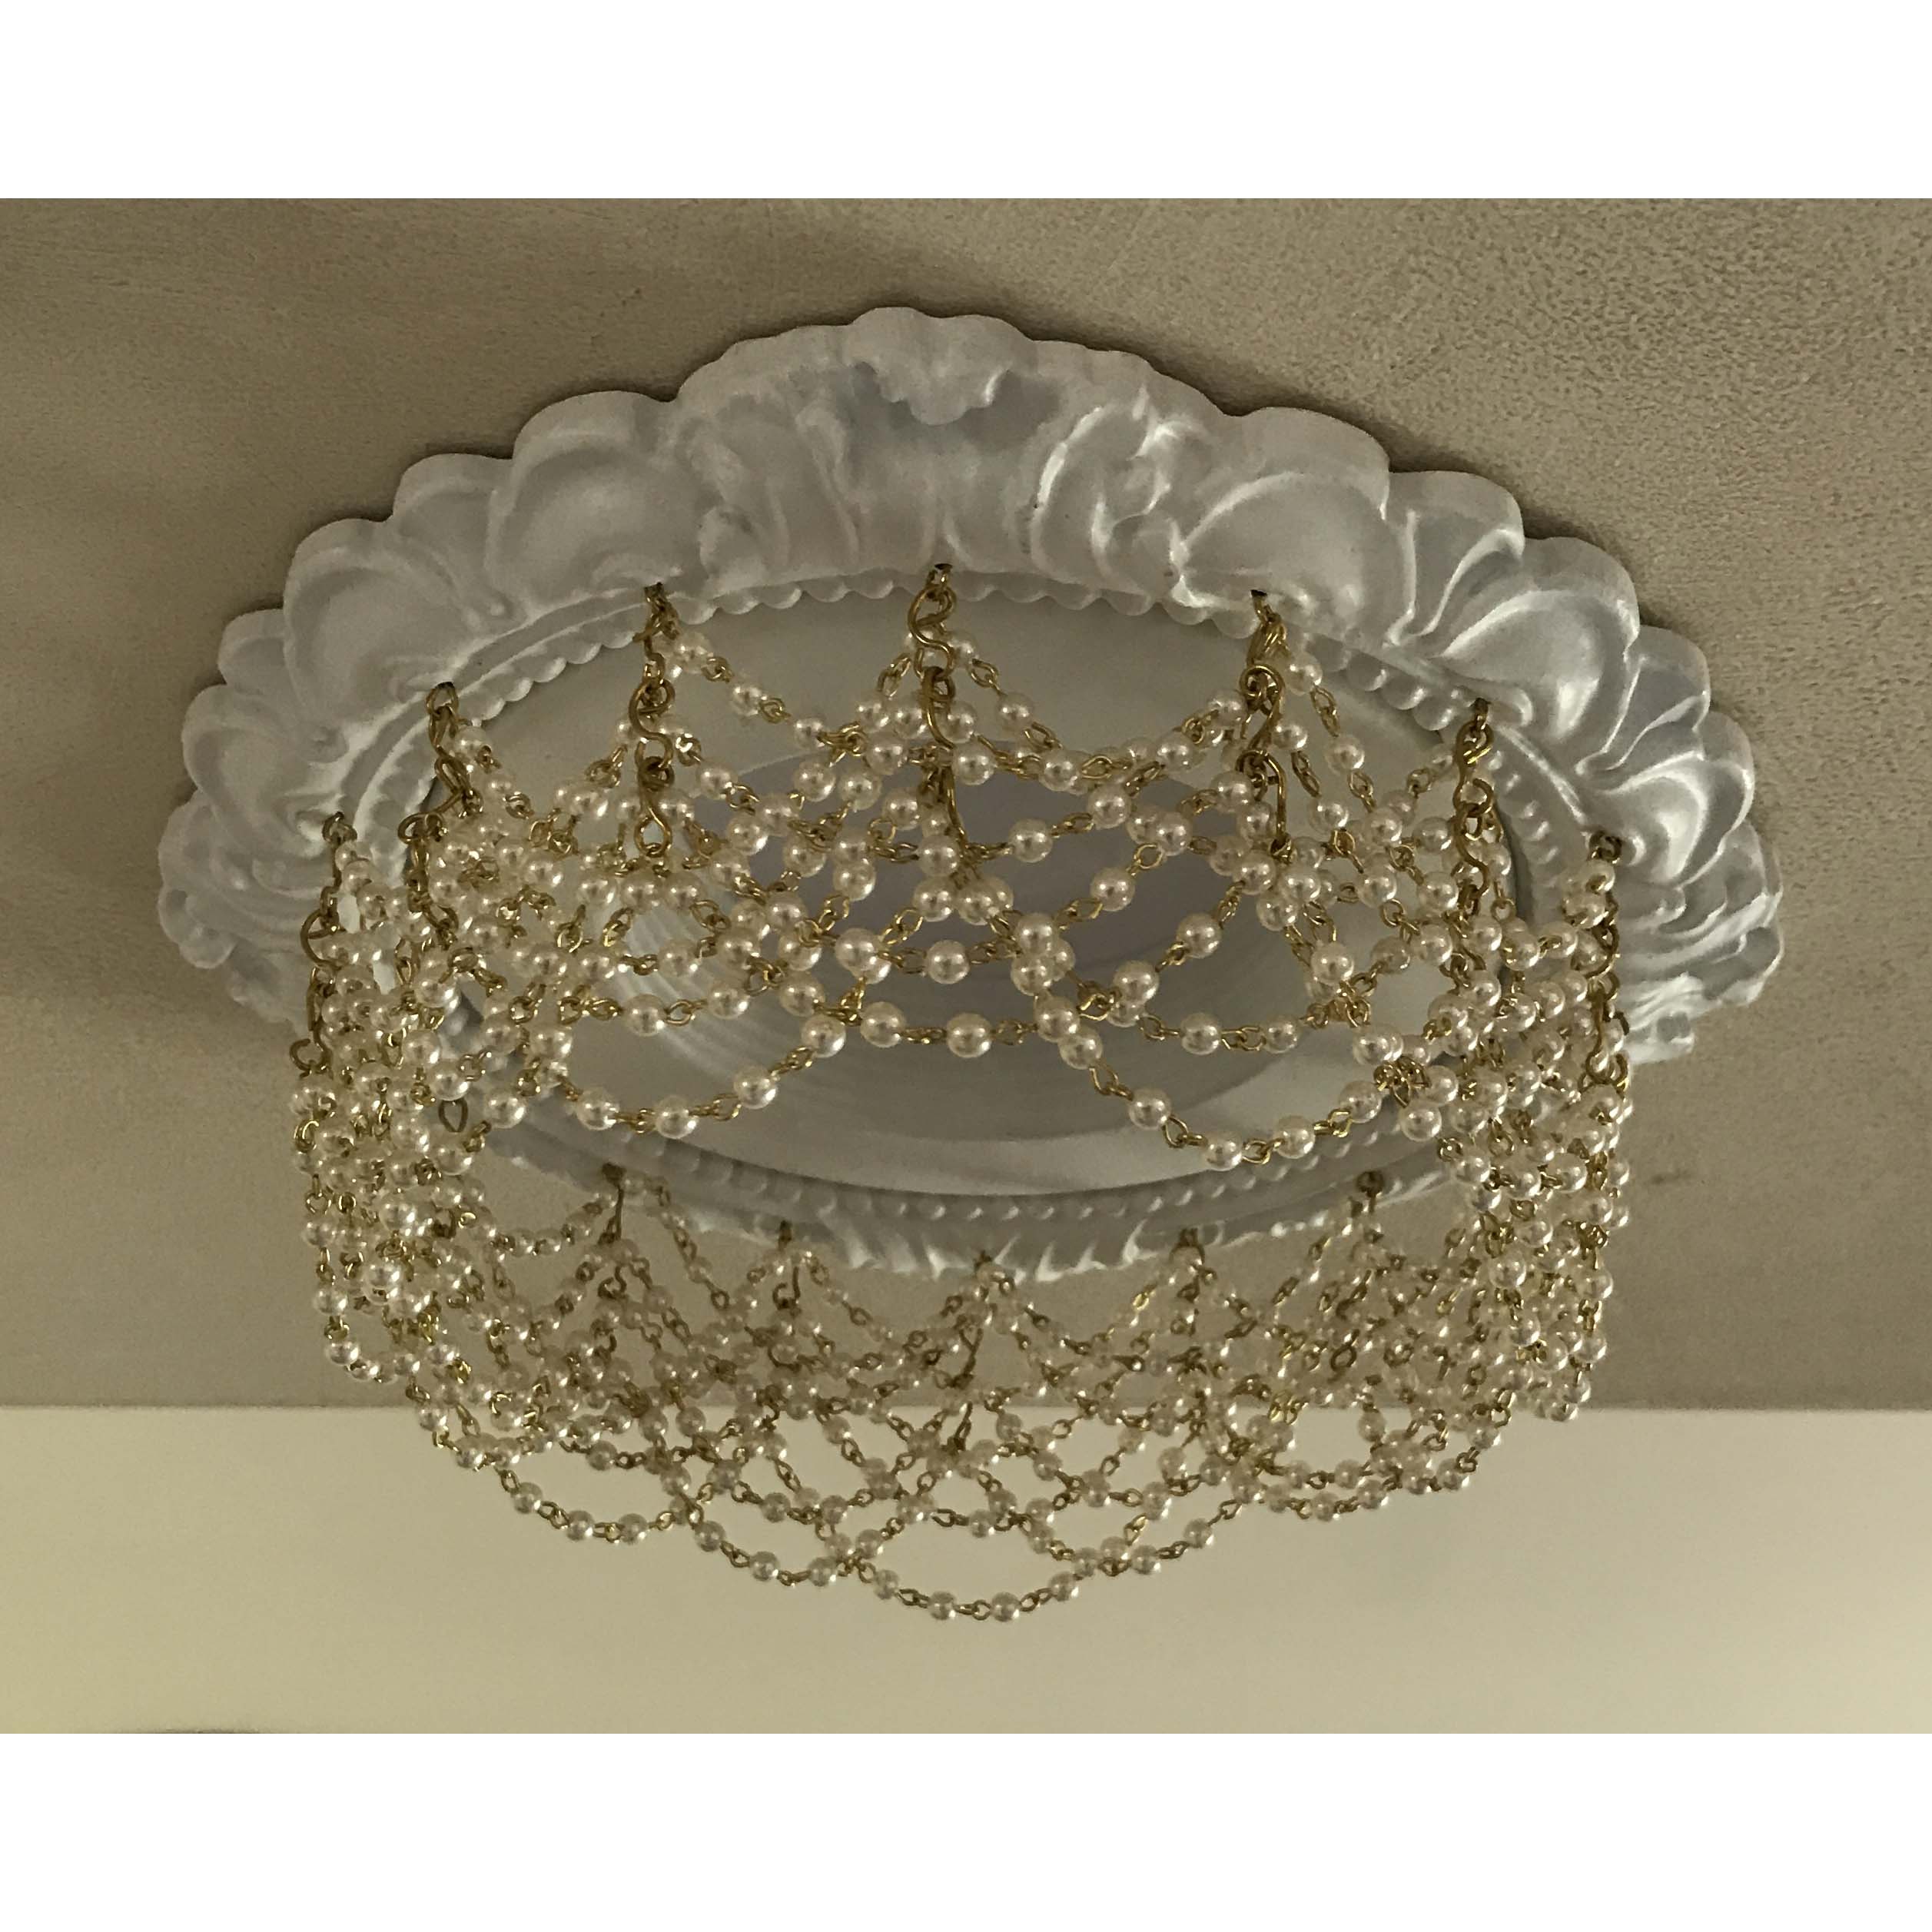 4-in-recessed chandelier with double pearl swags